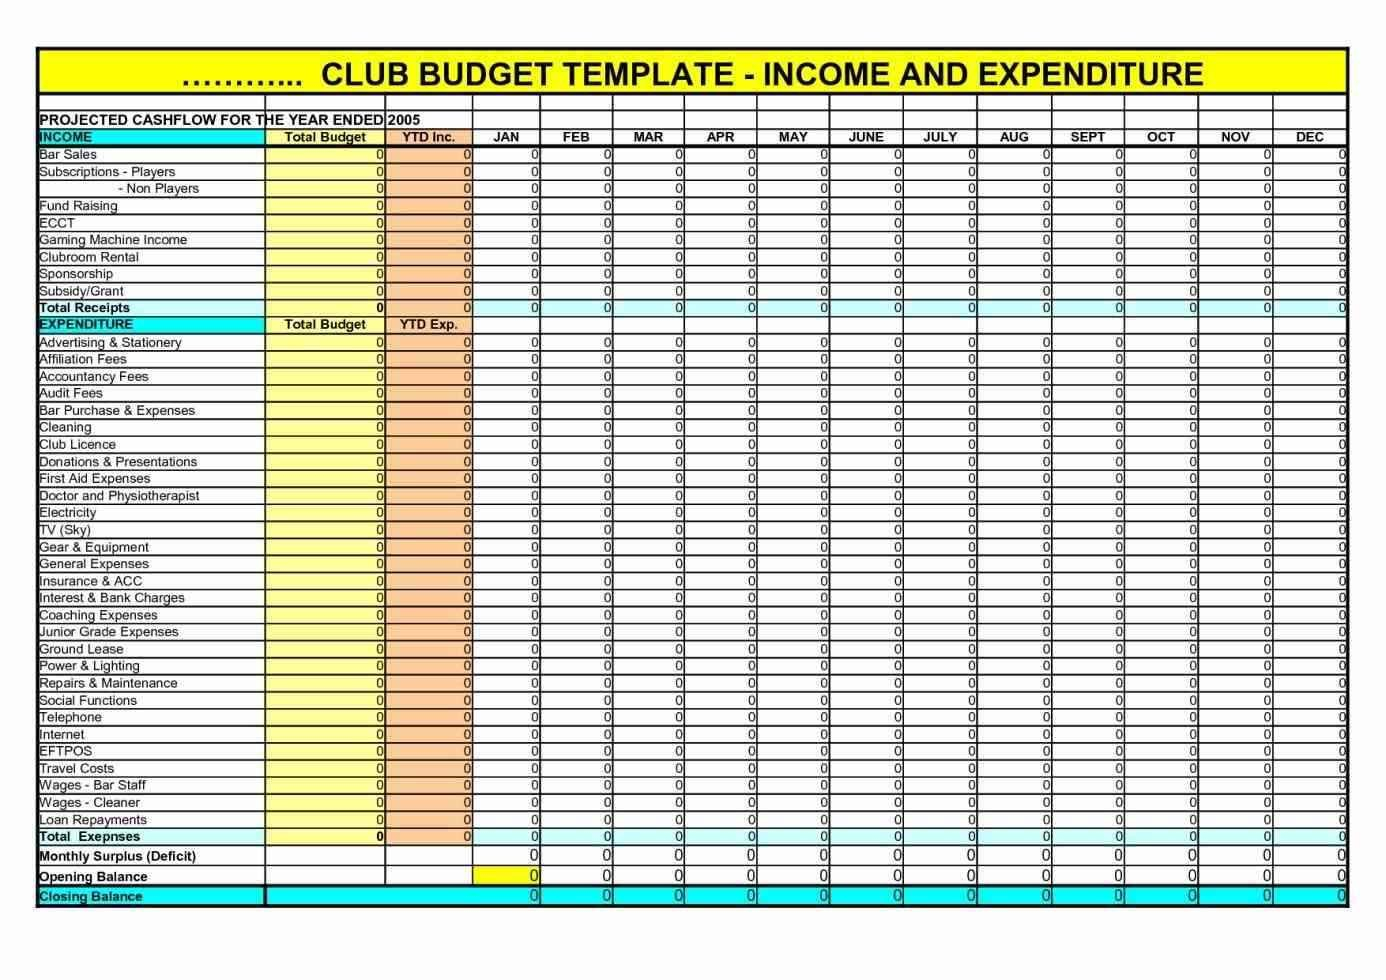 Self Employment Income Expense Tracking Worksheet And Tracking Pertaining To Self Employment Income Expense Tracking Worksheet